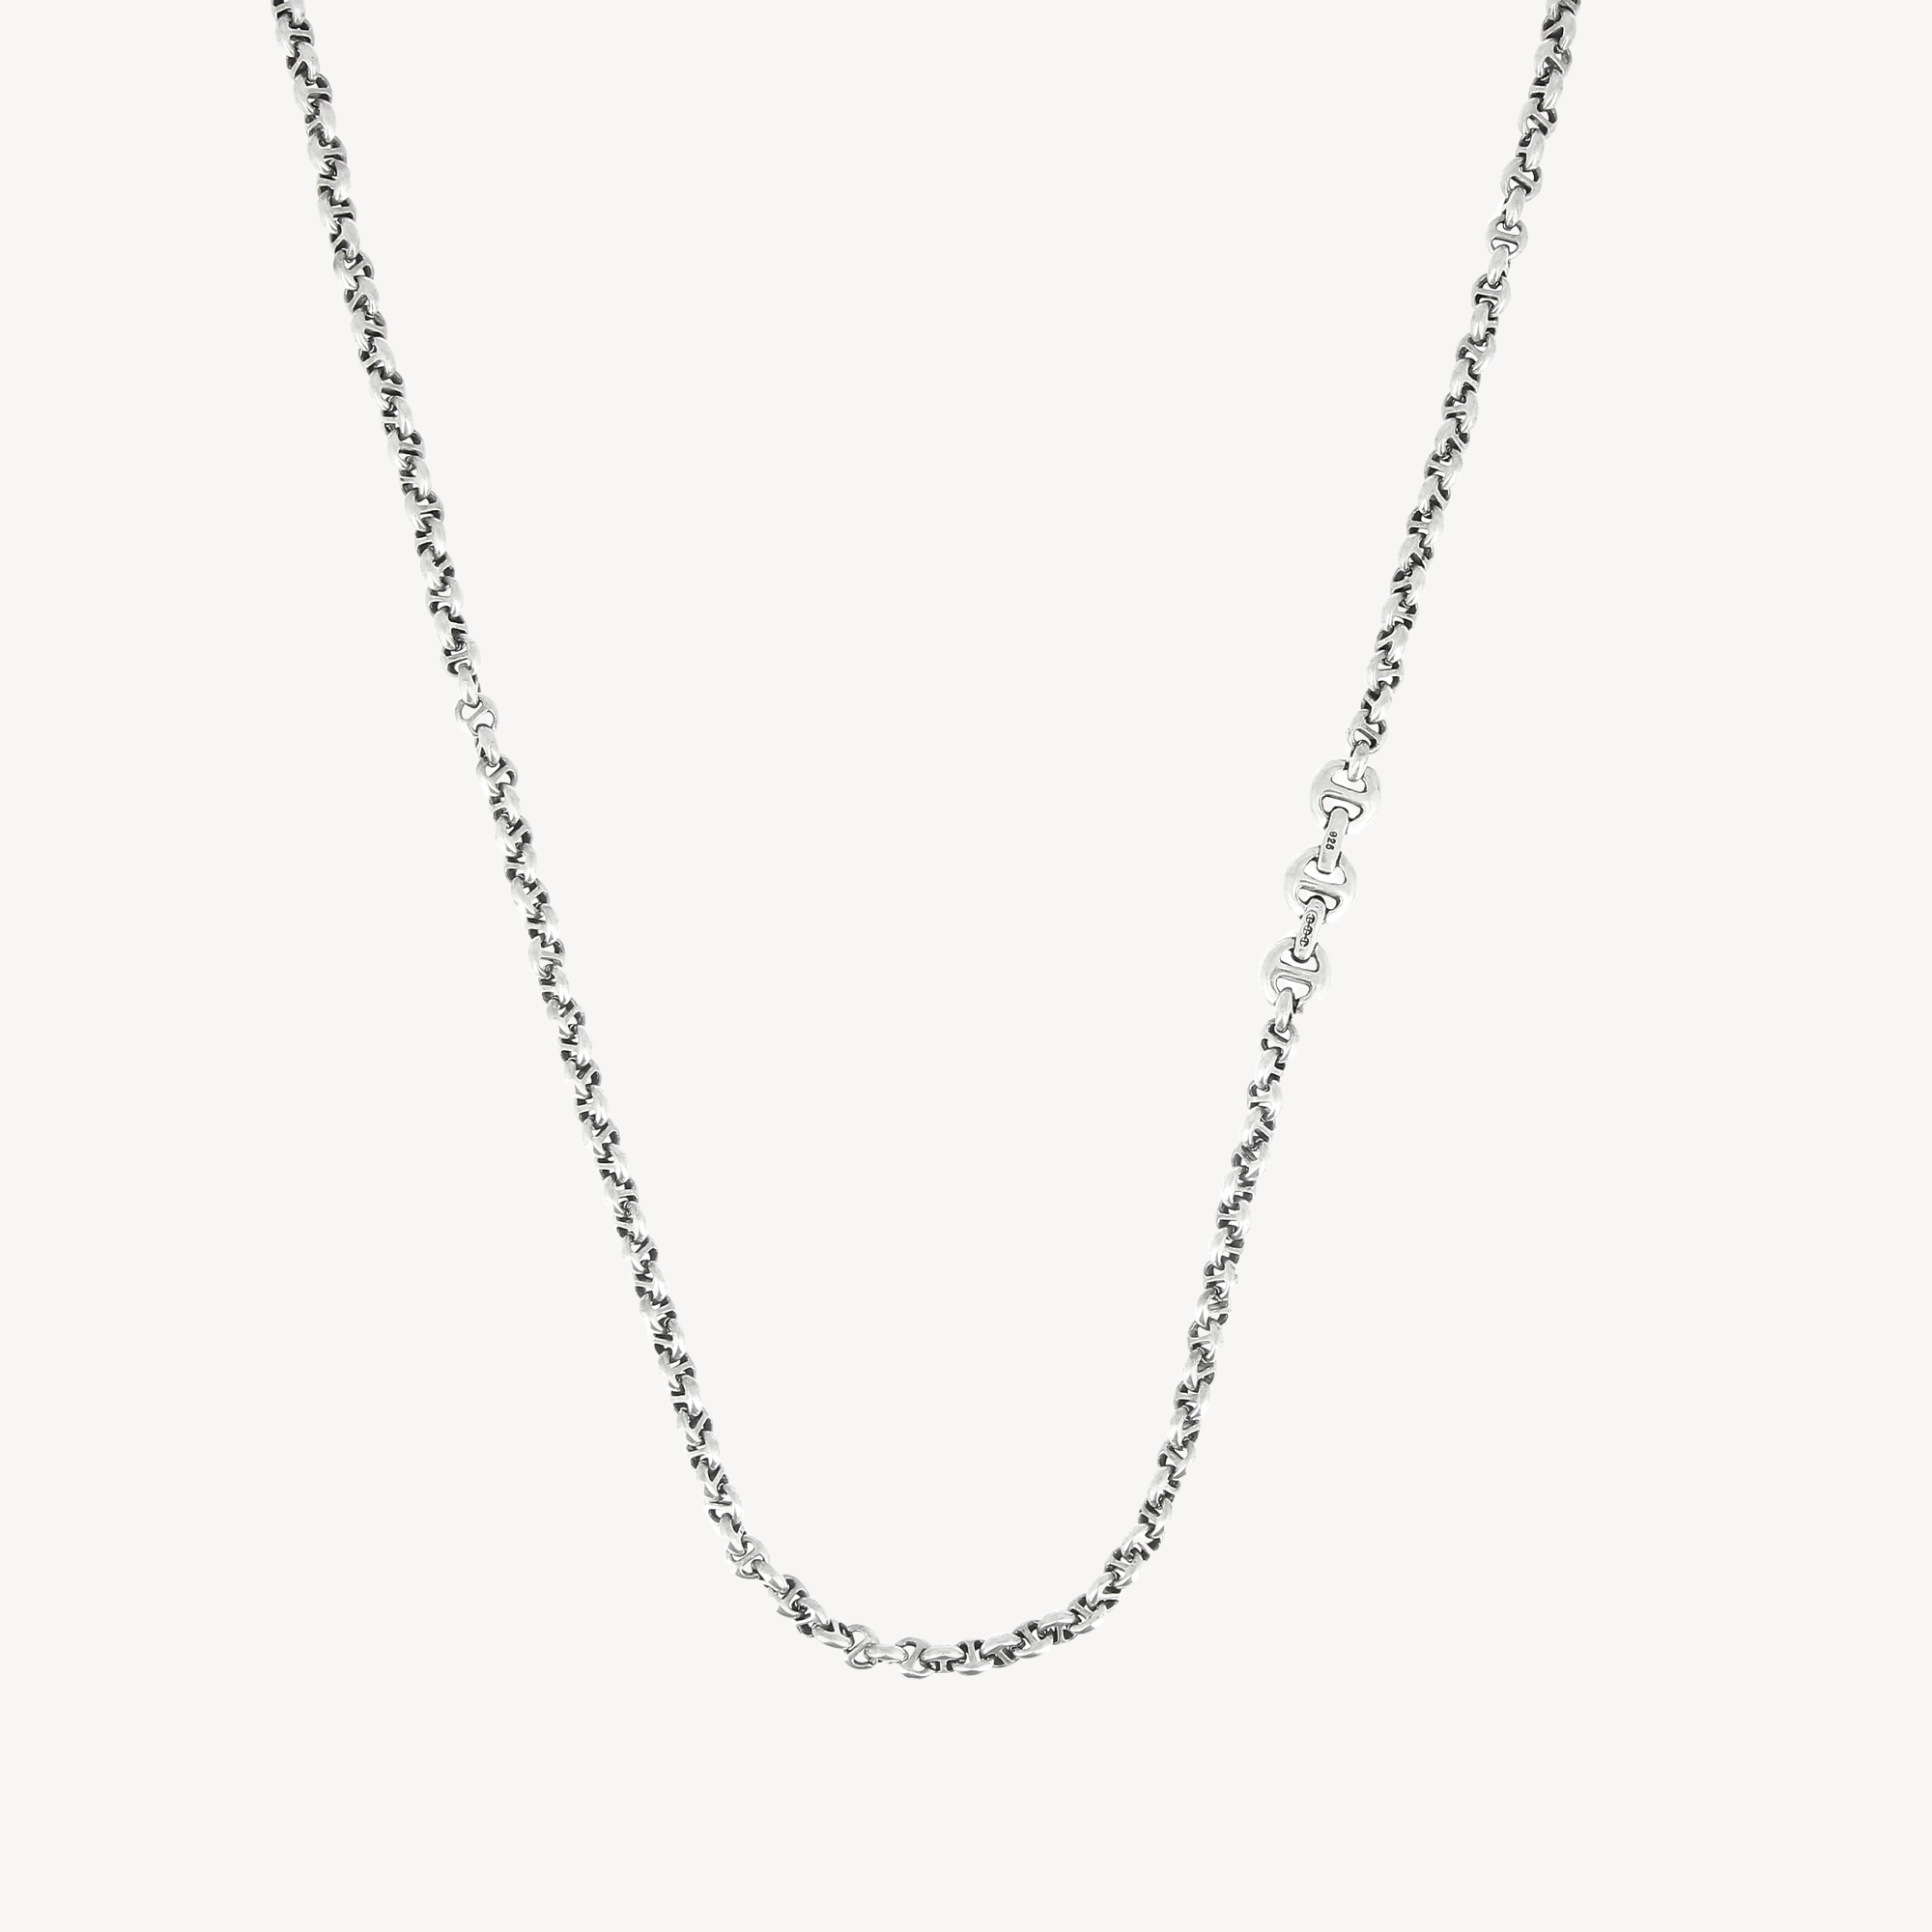 5mm Link Necklace with White Diamonds